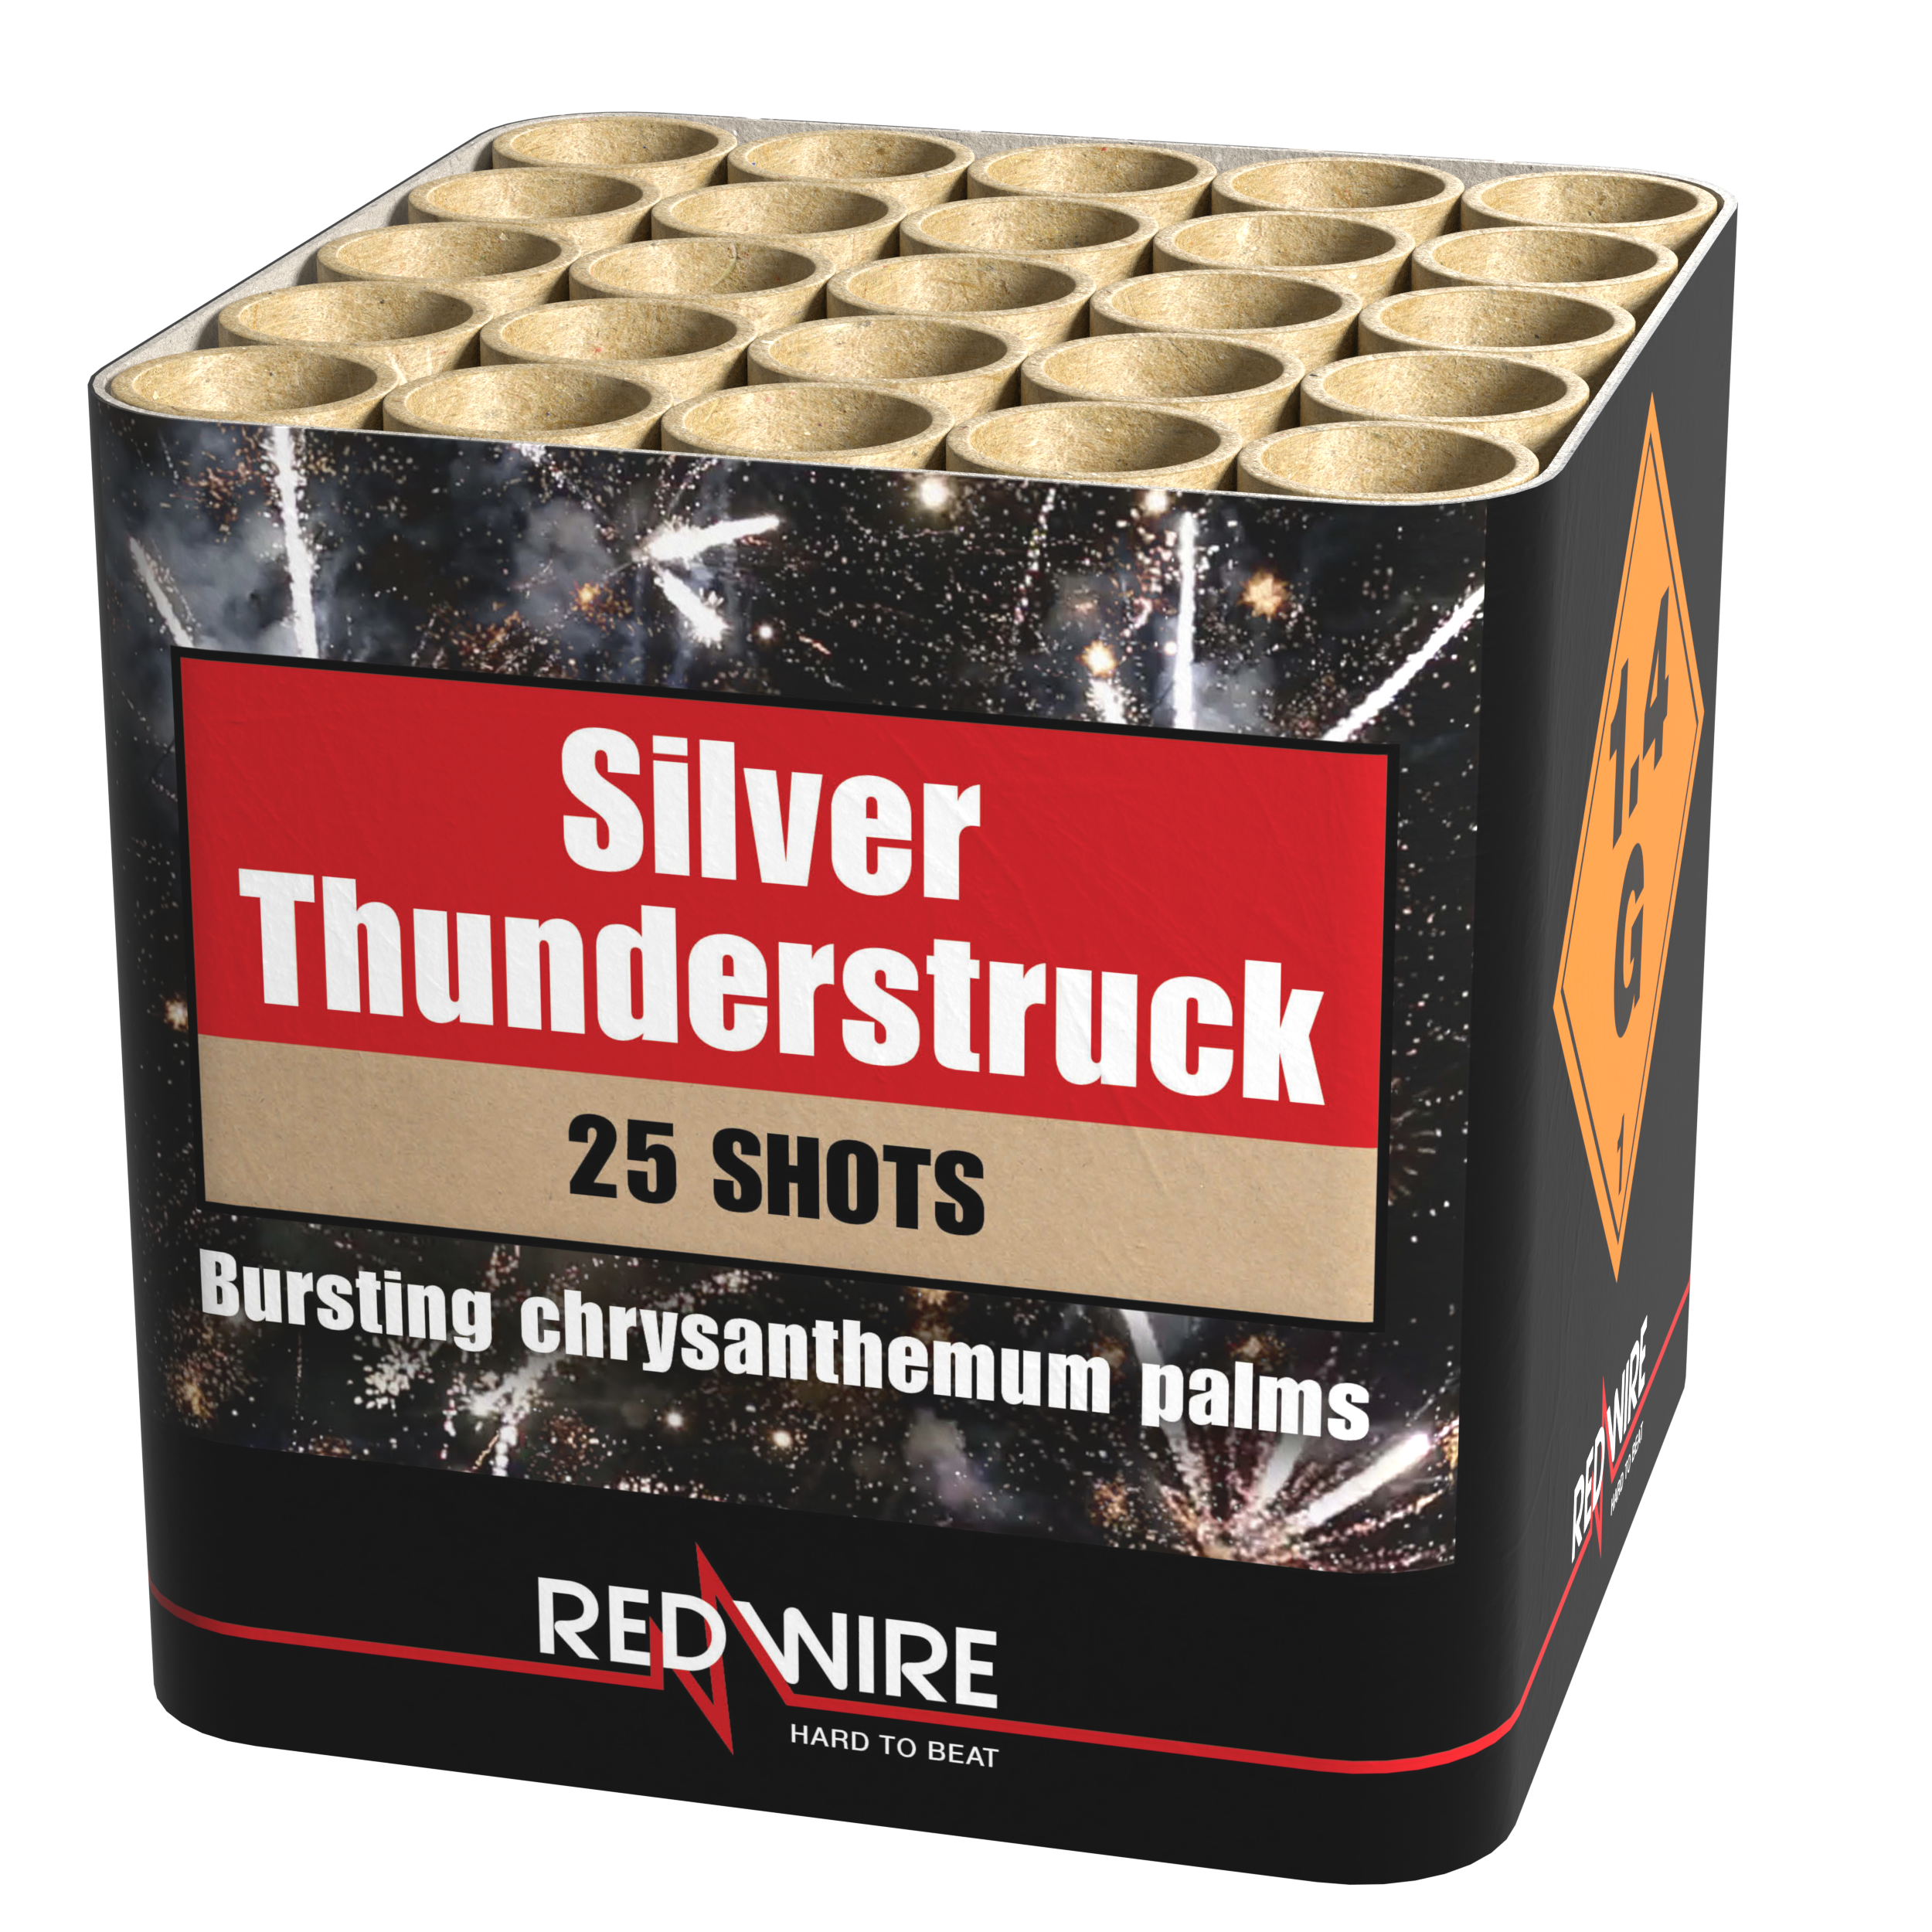 03637 Silver thunderstruck.png